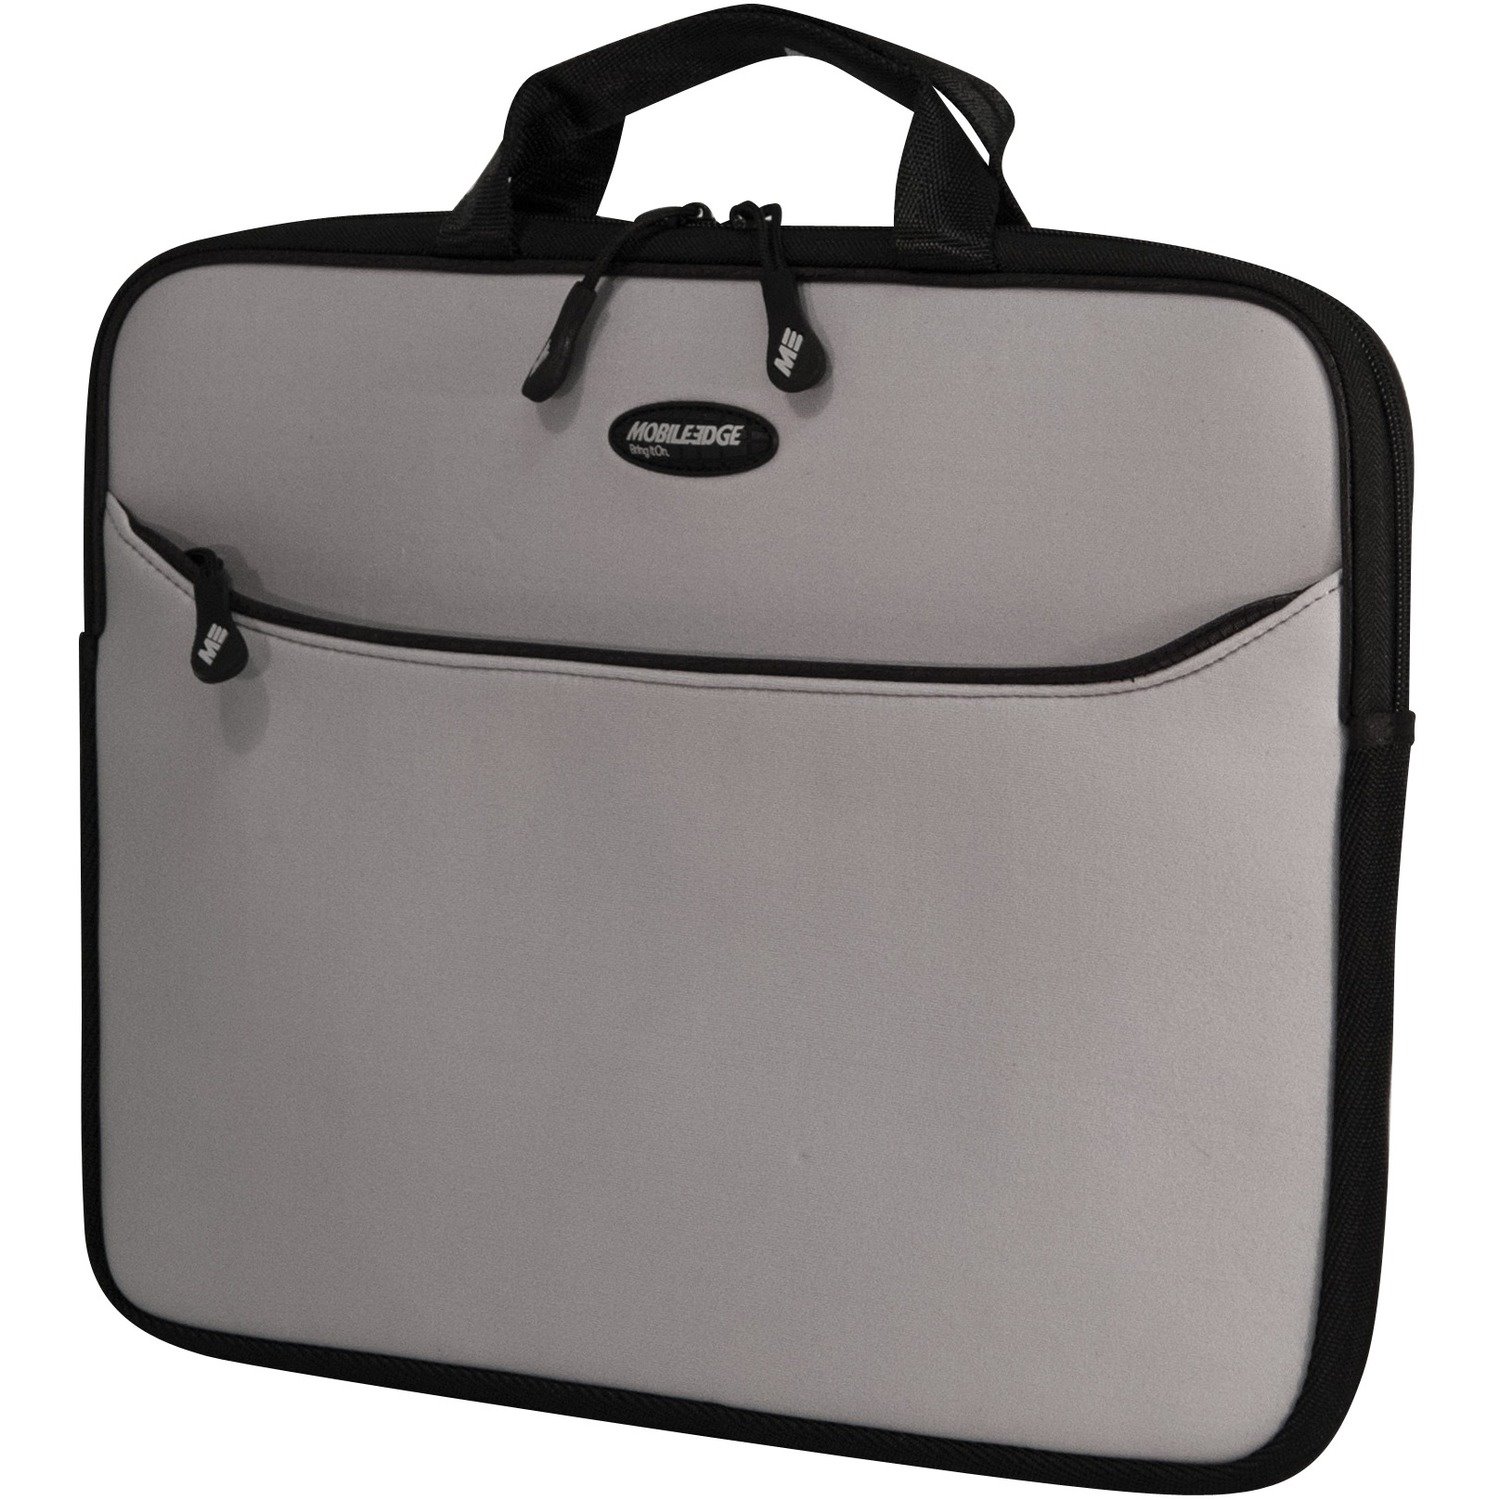 Mobile Edge SlipSuit Carrying Case (Sleeve) for 16" Notebook - Silver